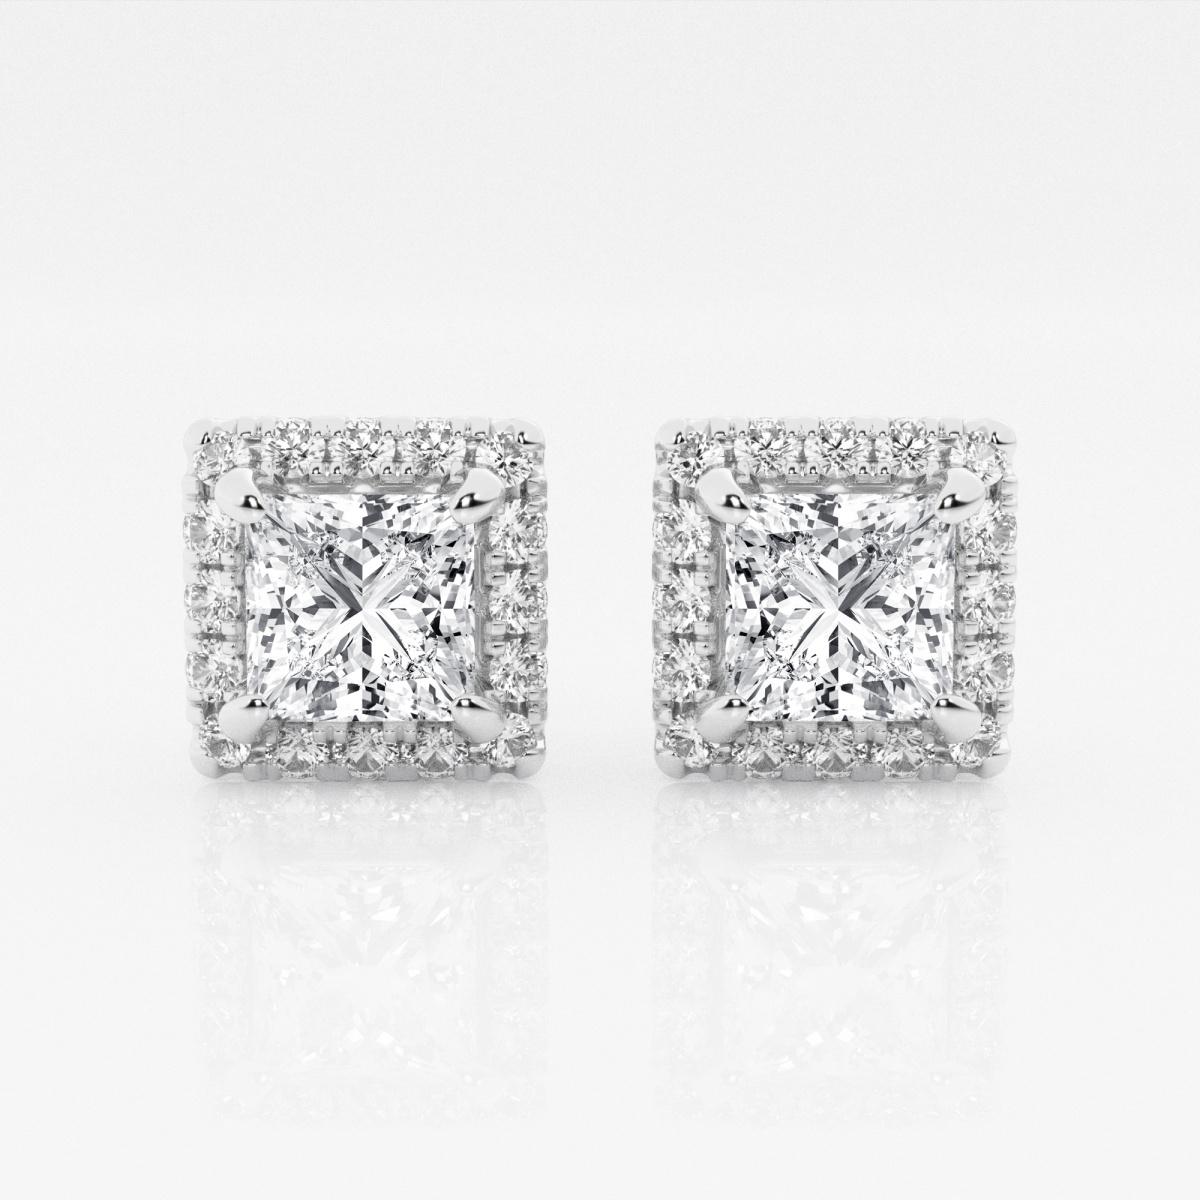 product video for 3 1/2 ctw Princess Lab Grown Diamond Halo Certified Stud Earrings